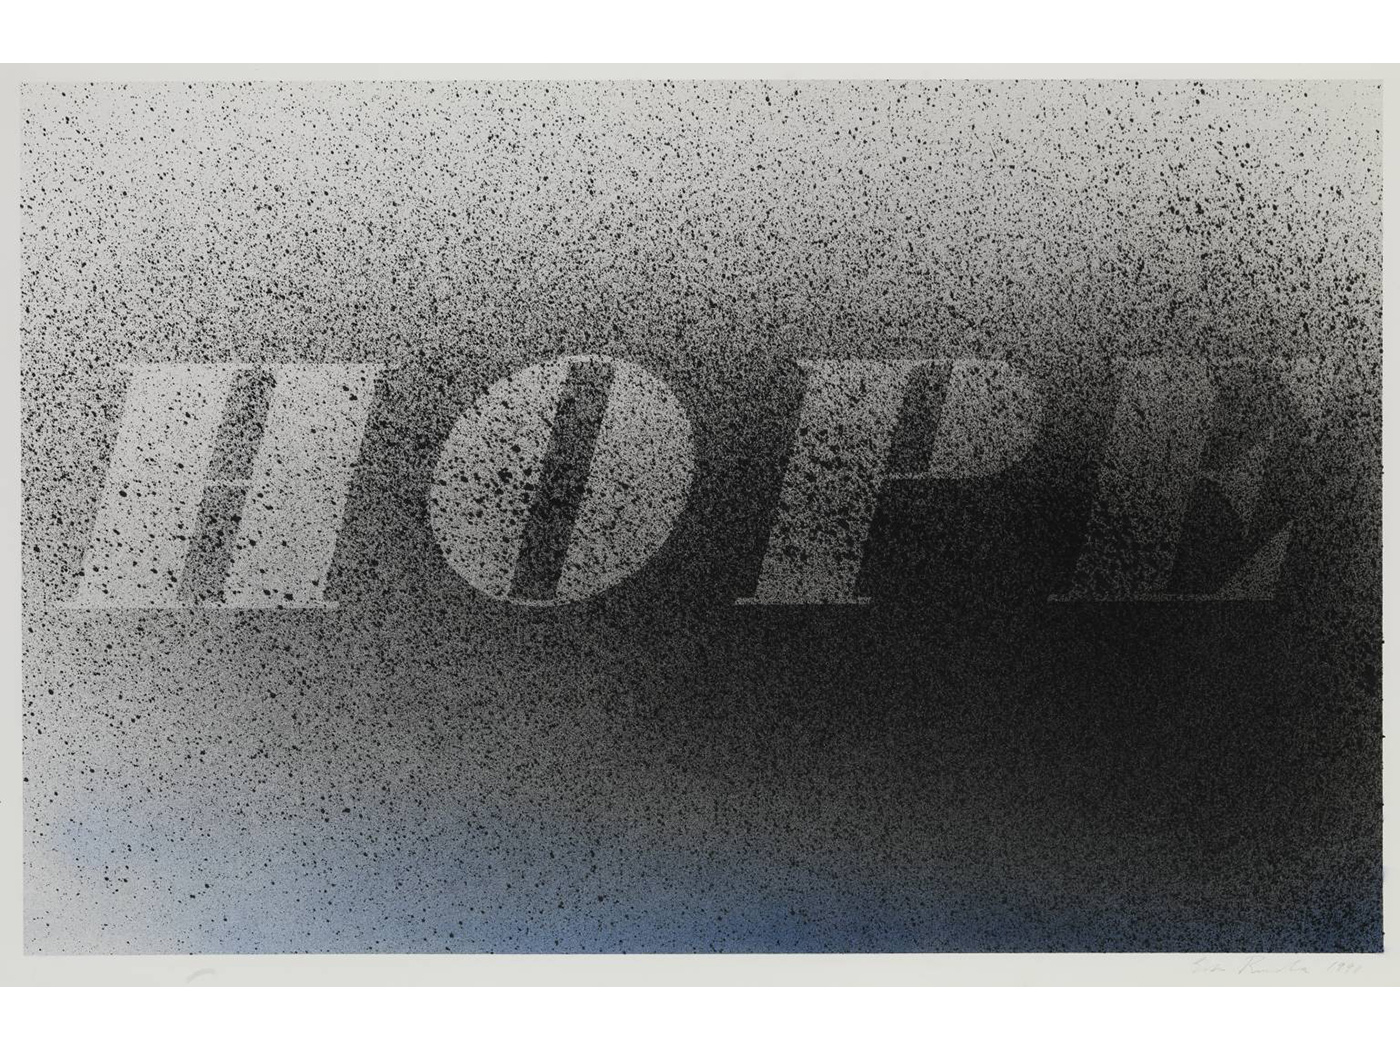 Ruscha's work creates abstract entities from capitalised lettering. Ruscha's sees the acts of taking words out of context as a form of abstraction. As seen here in 'HOPE' (1998).